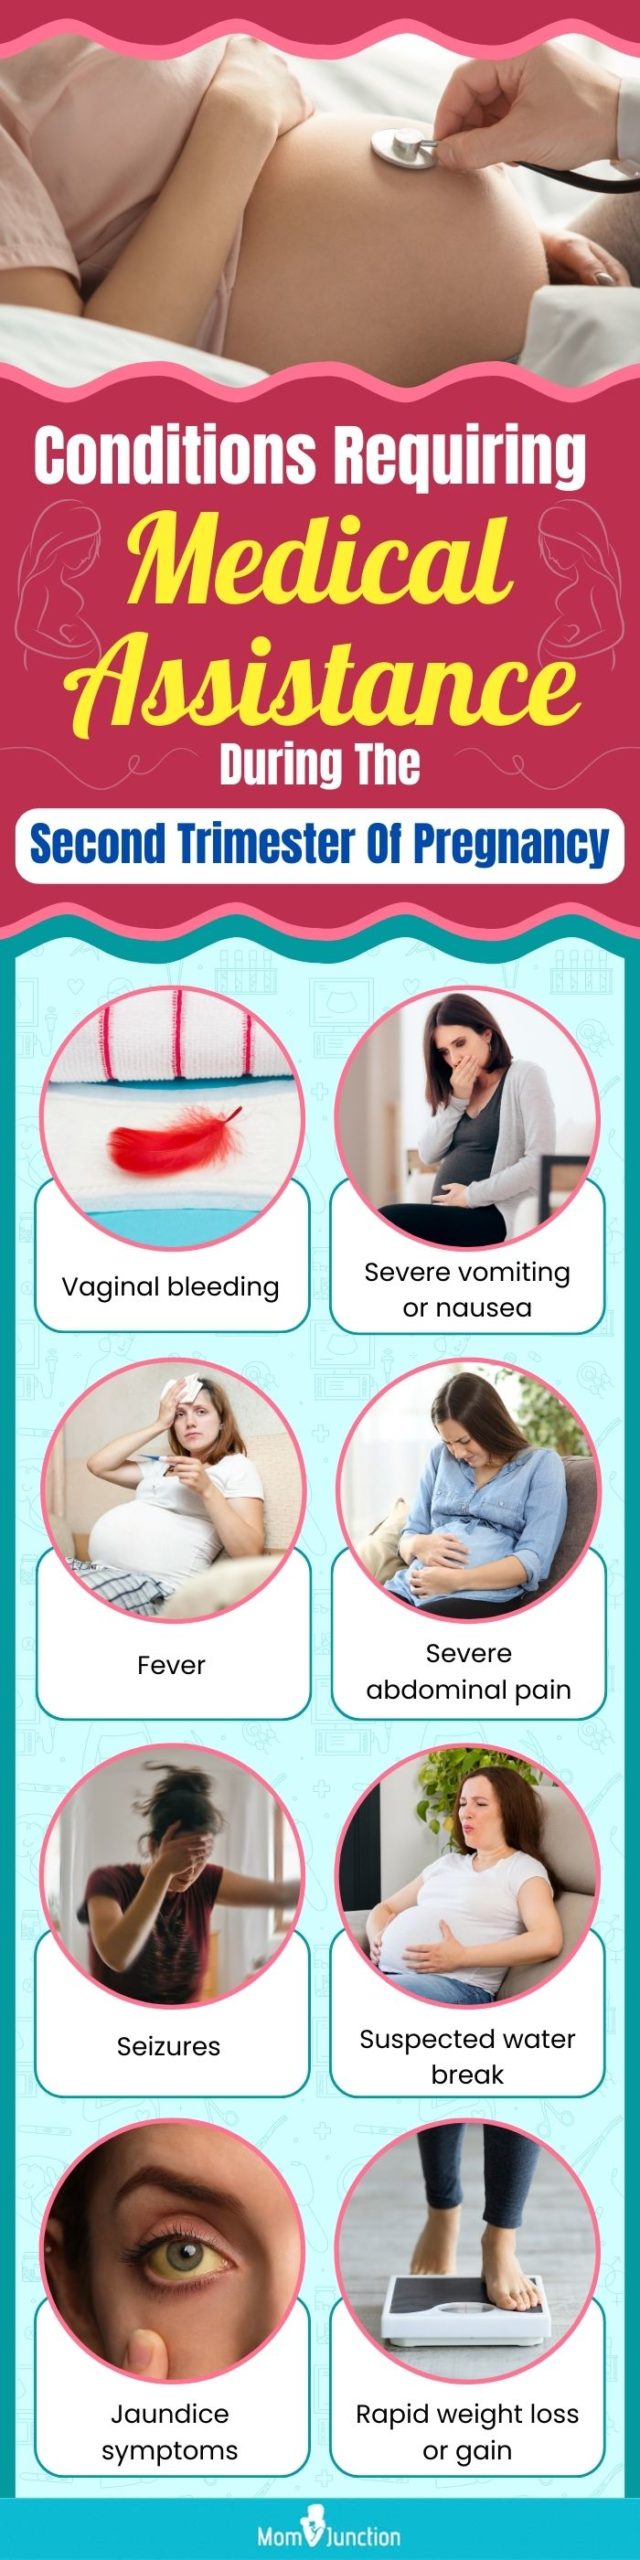 conditions requiring medical assistance during the second trimester of pregnancy (infographic)